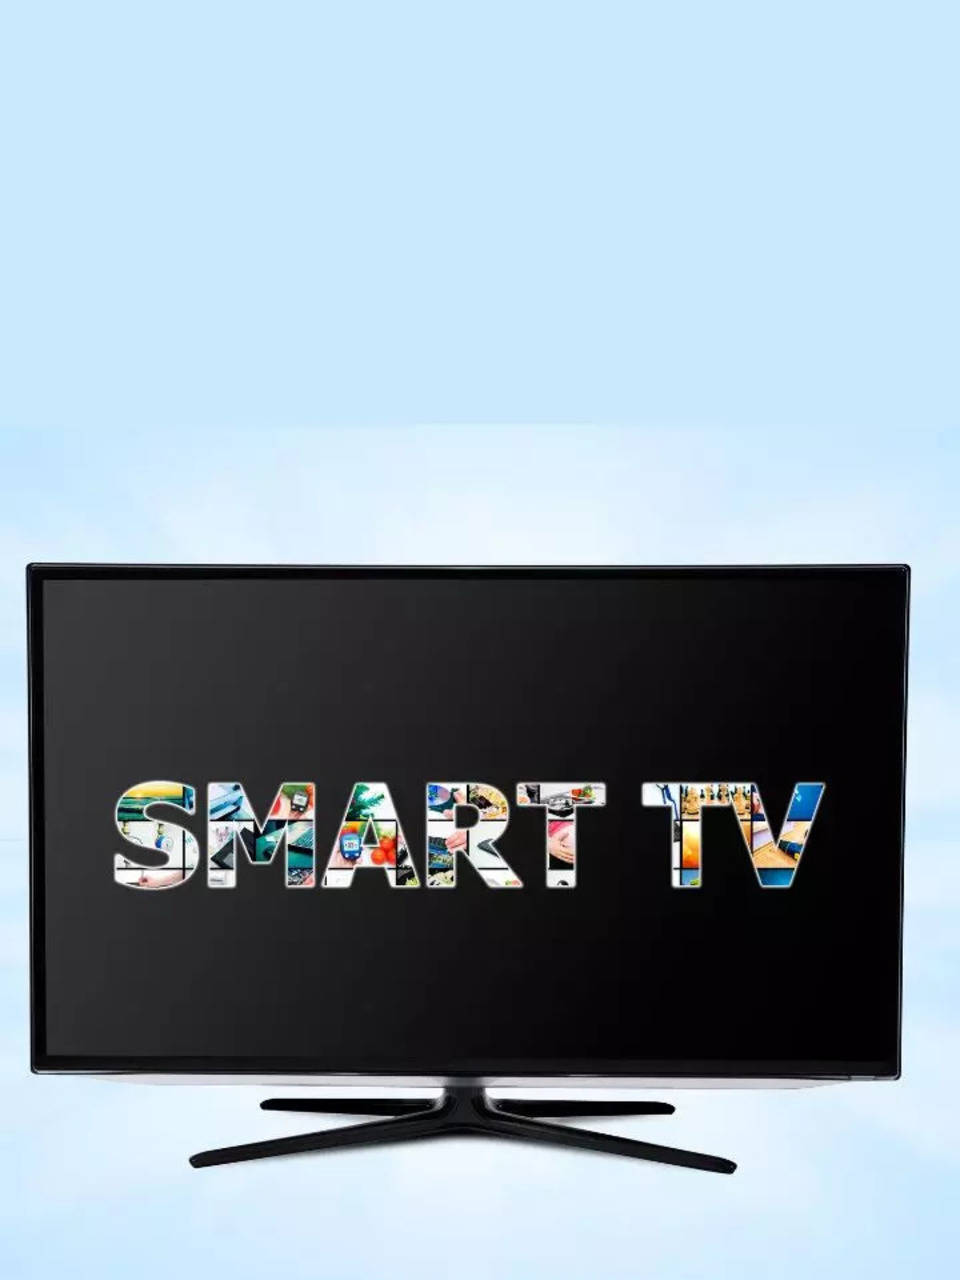 10 things to consider while buying a smart TV for your home